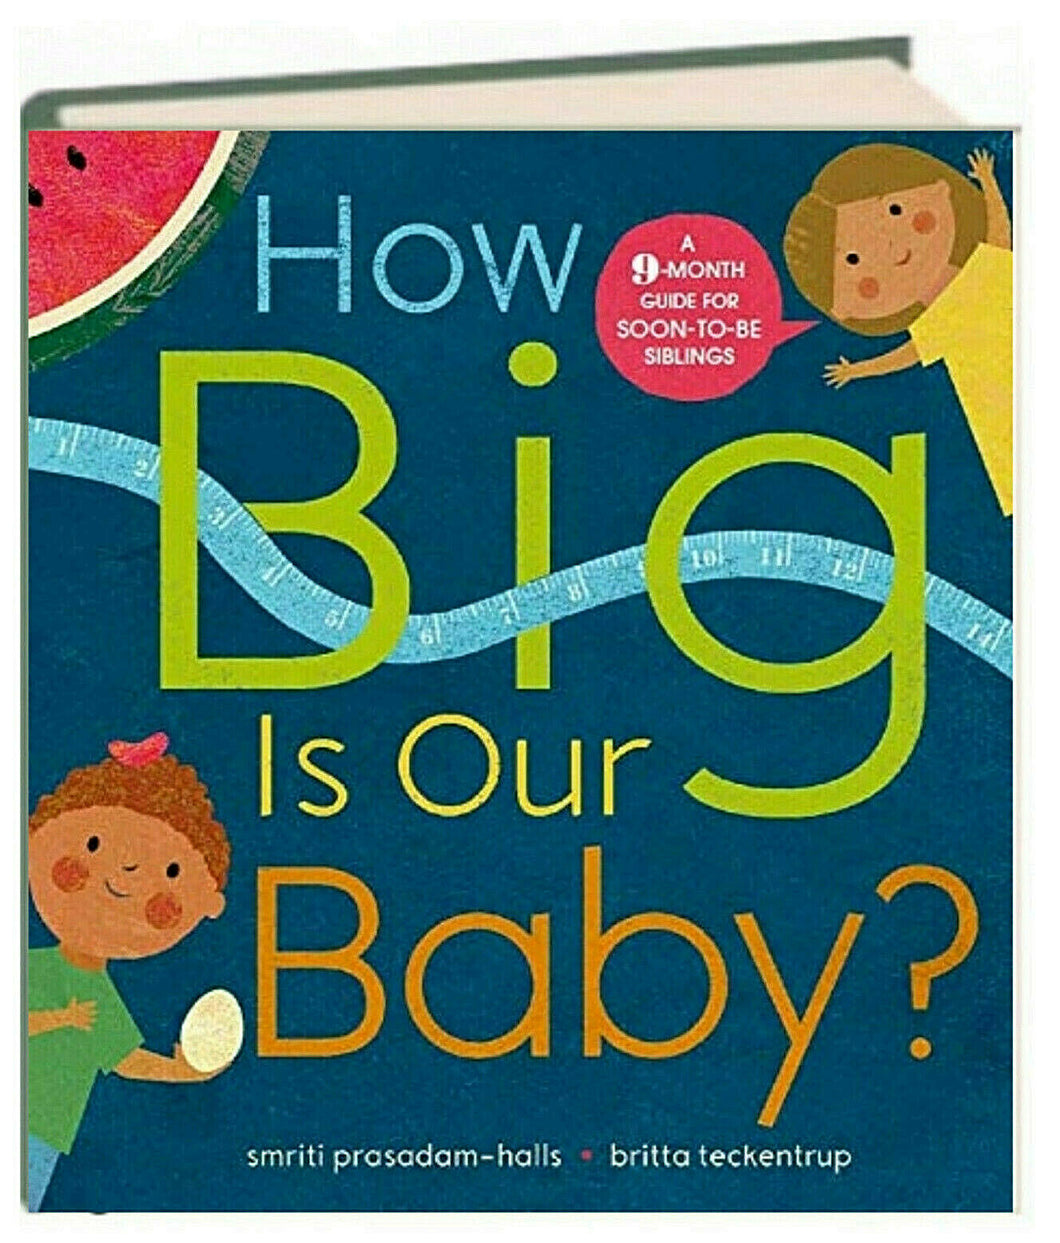 Usborne How Big is Our Baby